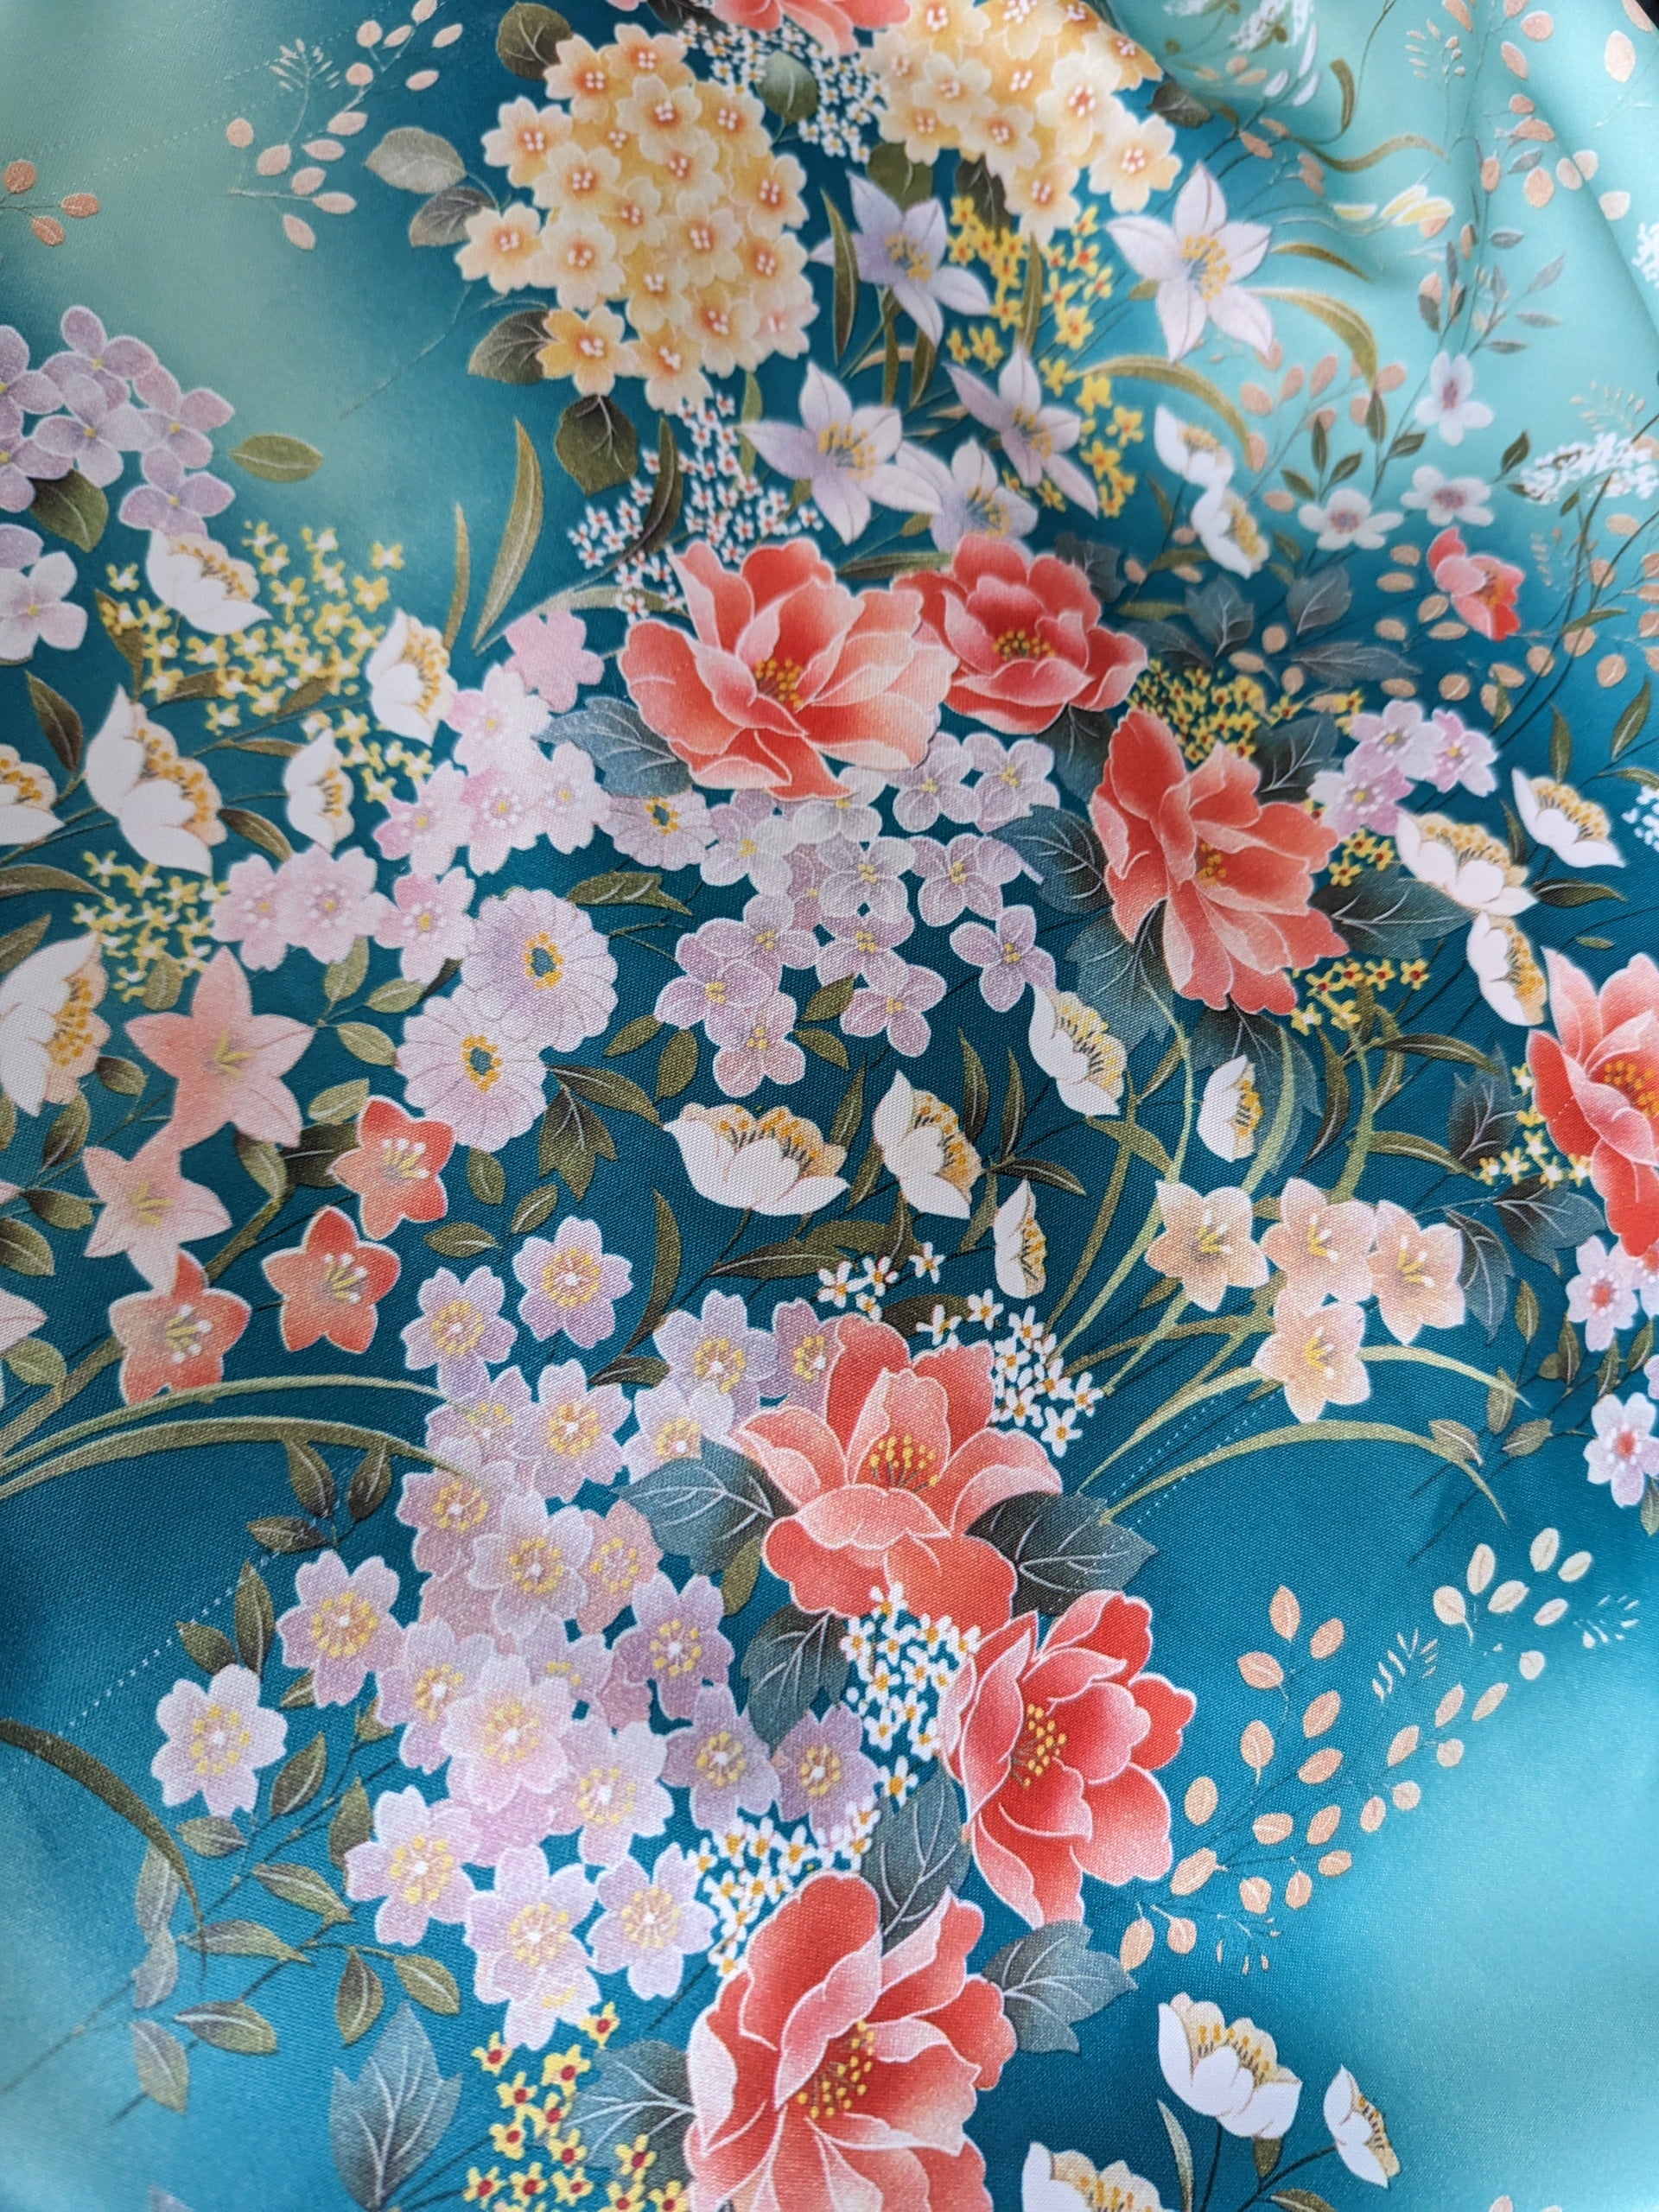 Floral pattern on robe